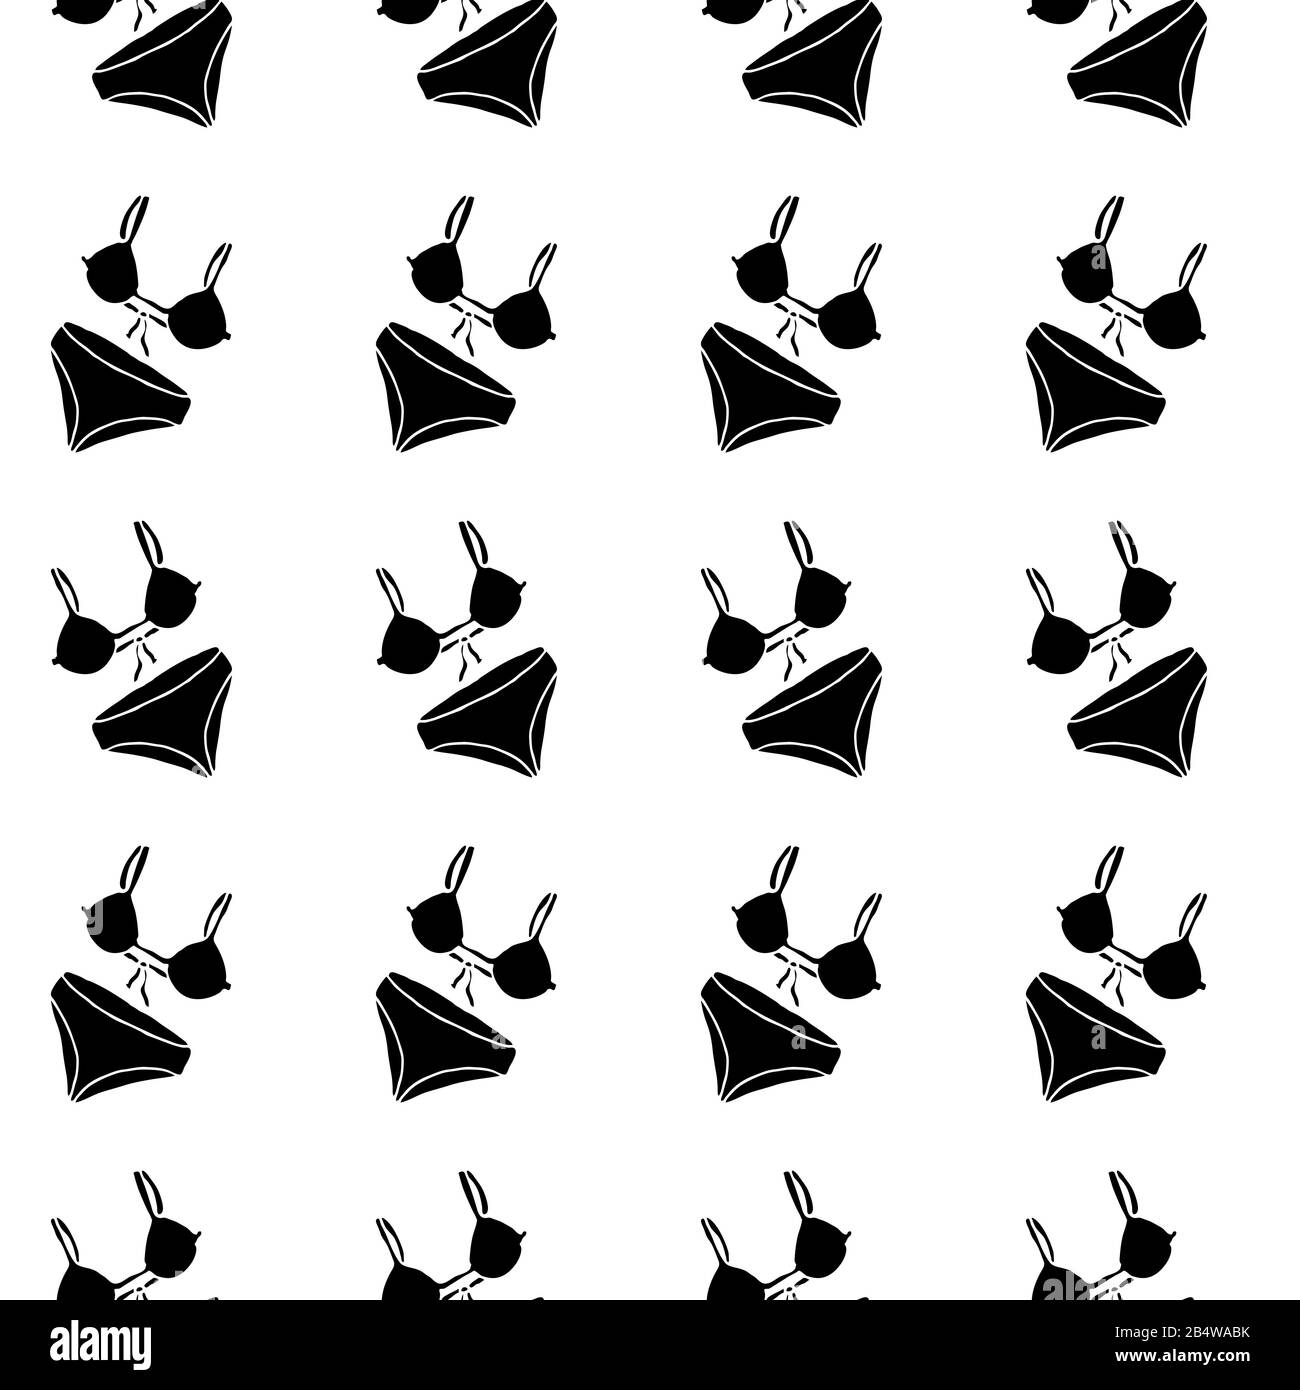 Seamless pattern from swimming suit. Summer clothes and accessories. Black silhouette on white background. Cartoon doodle sketch can be used in cards, posters, flyers, banners, logo, clothes design, fashion, textile prints etc. Vector illustration EPS10 Stock Vector